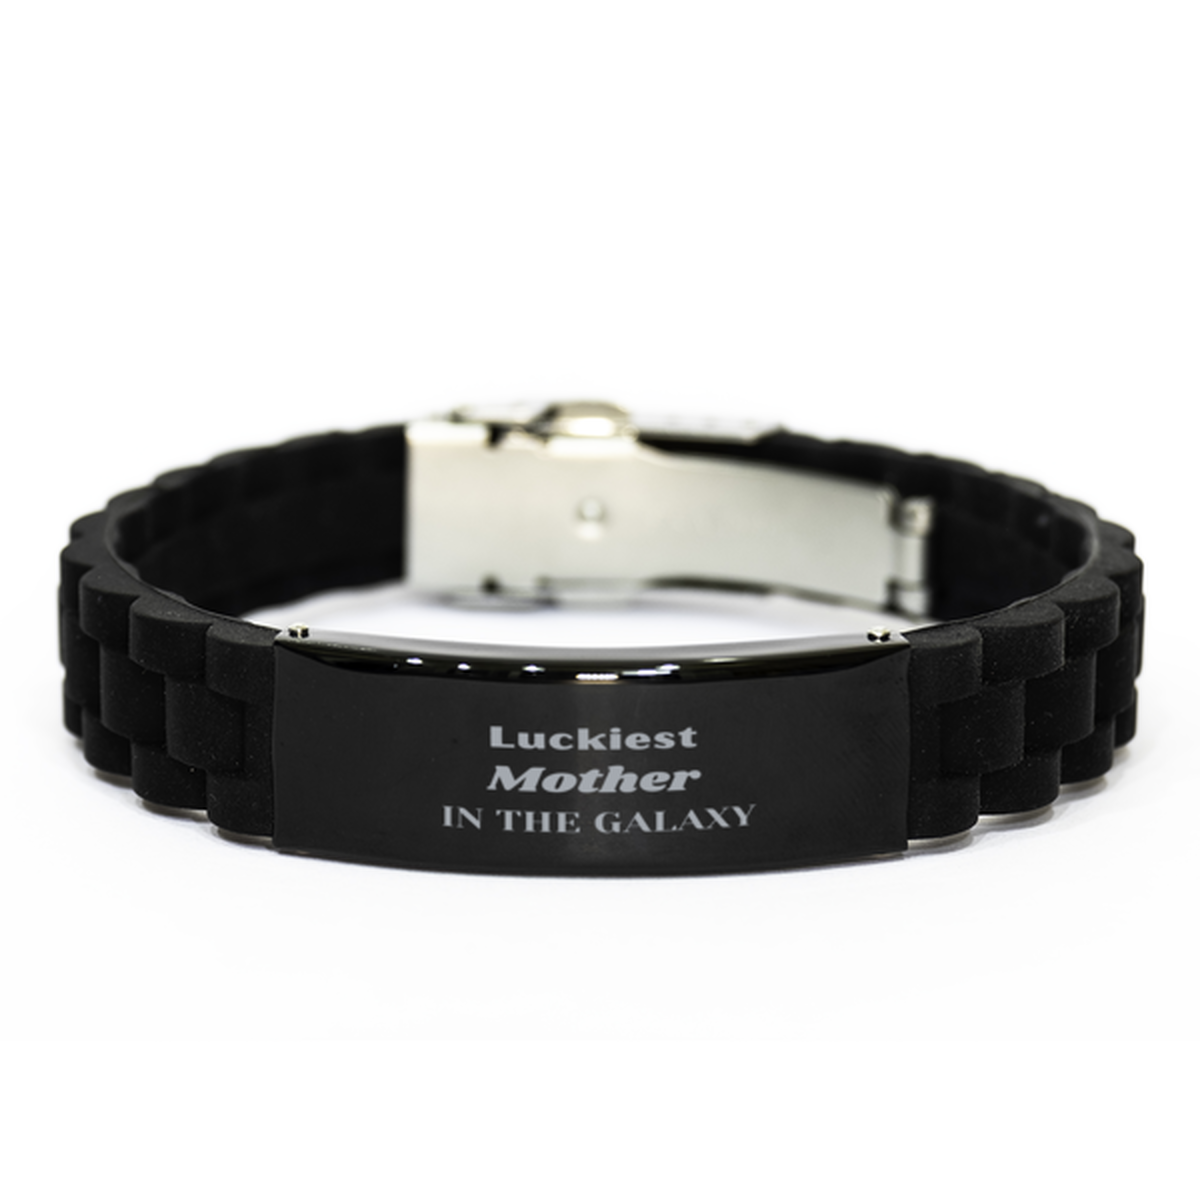 Luckiest Mother in the Galaxy, To My Mother Engraved Gifts, Christmas Mother Black Glidelock Clasp Bracelet Gifts, X-mas Birthday Unique Gifts For Mother Men Women